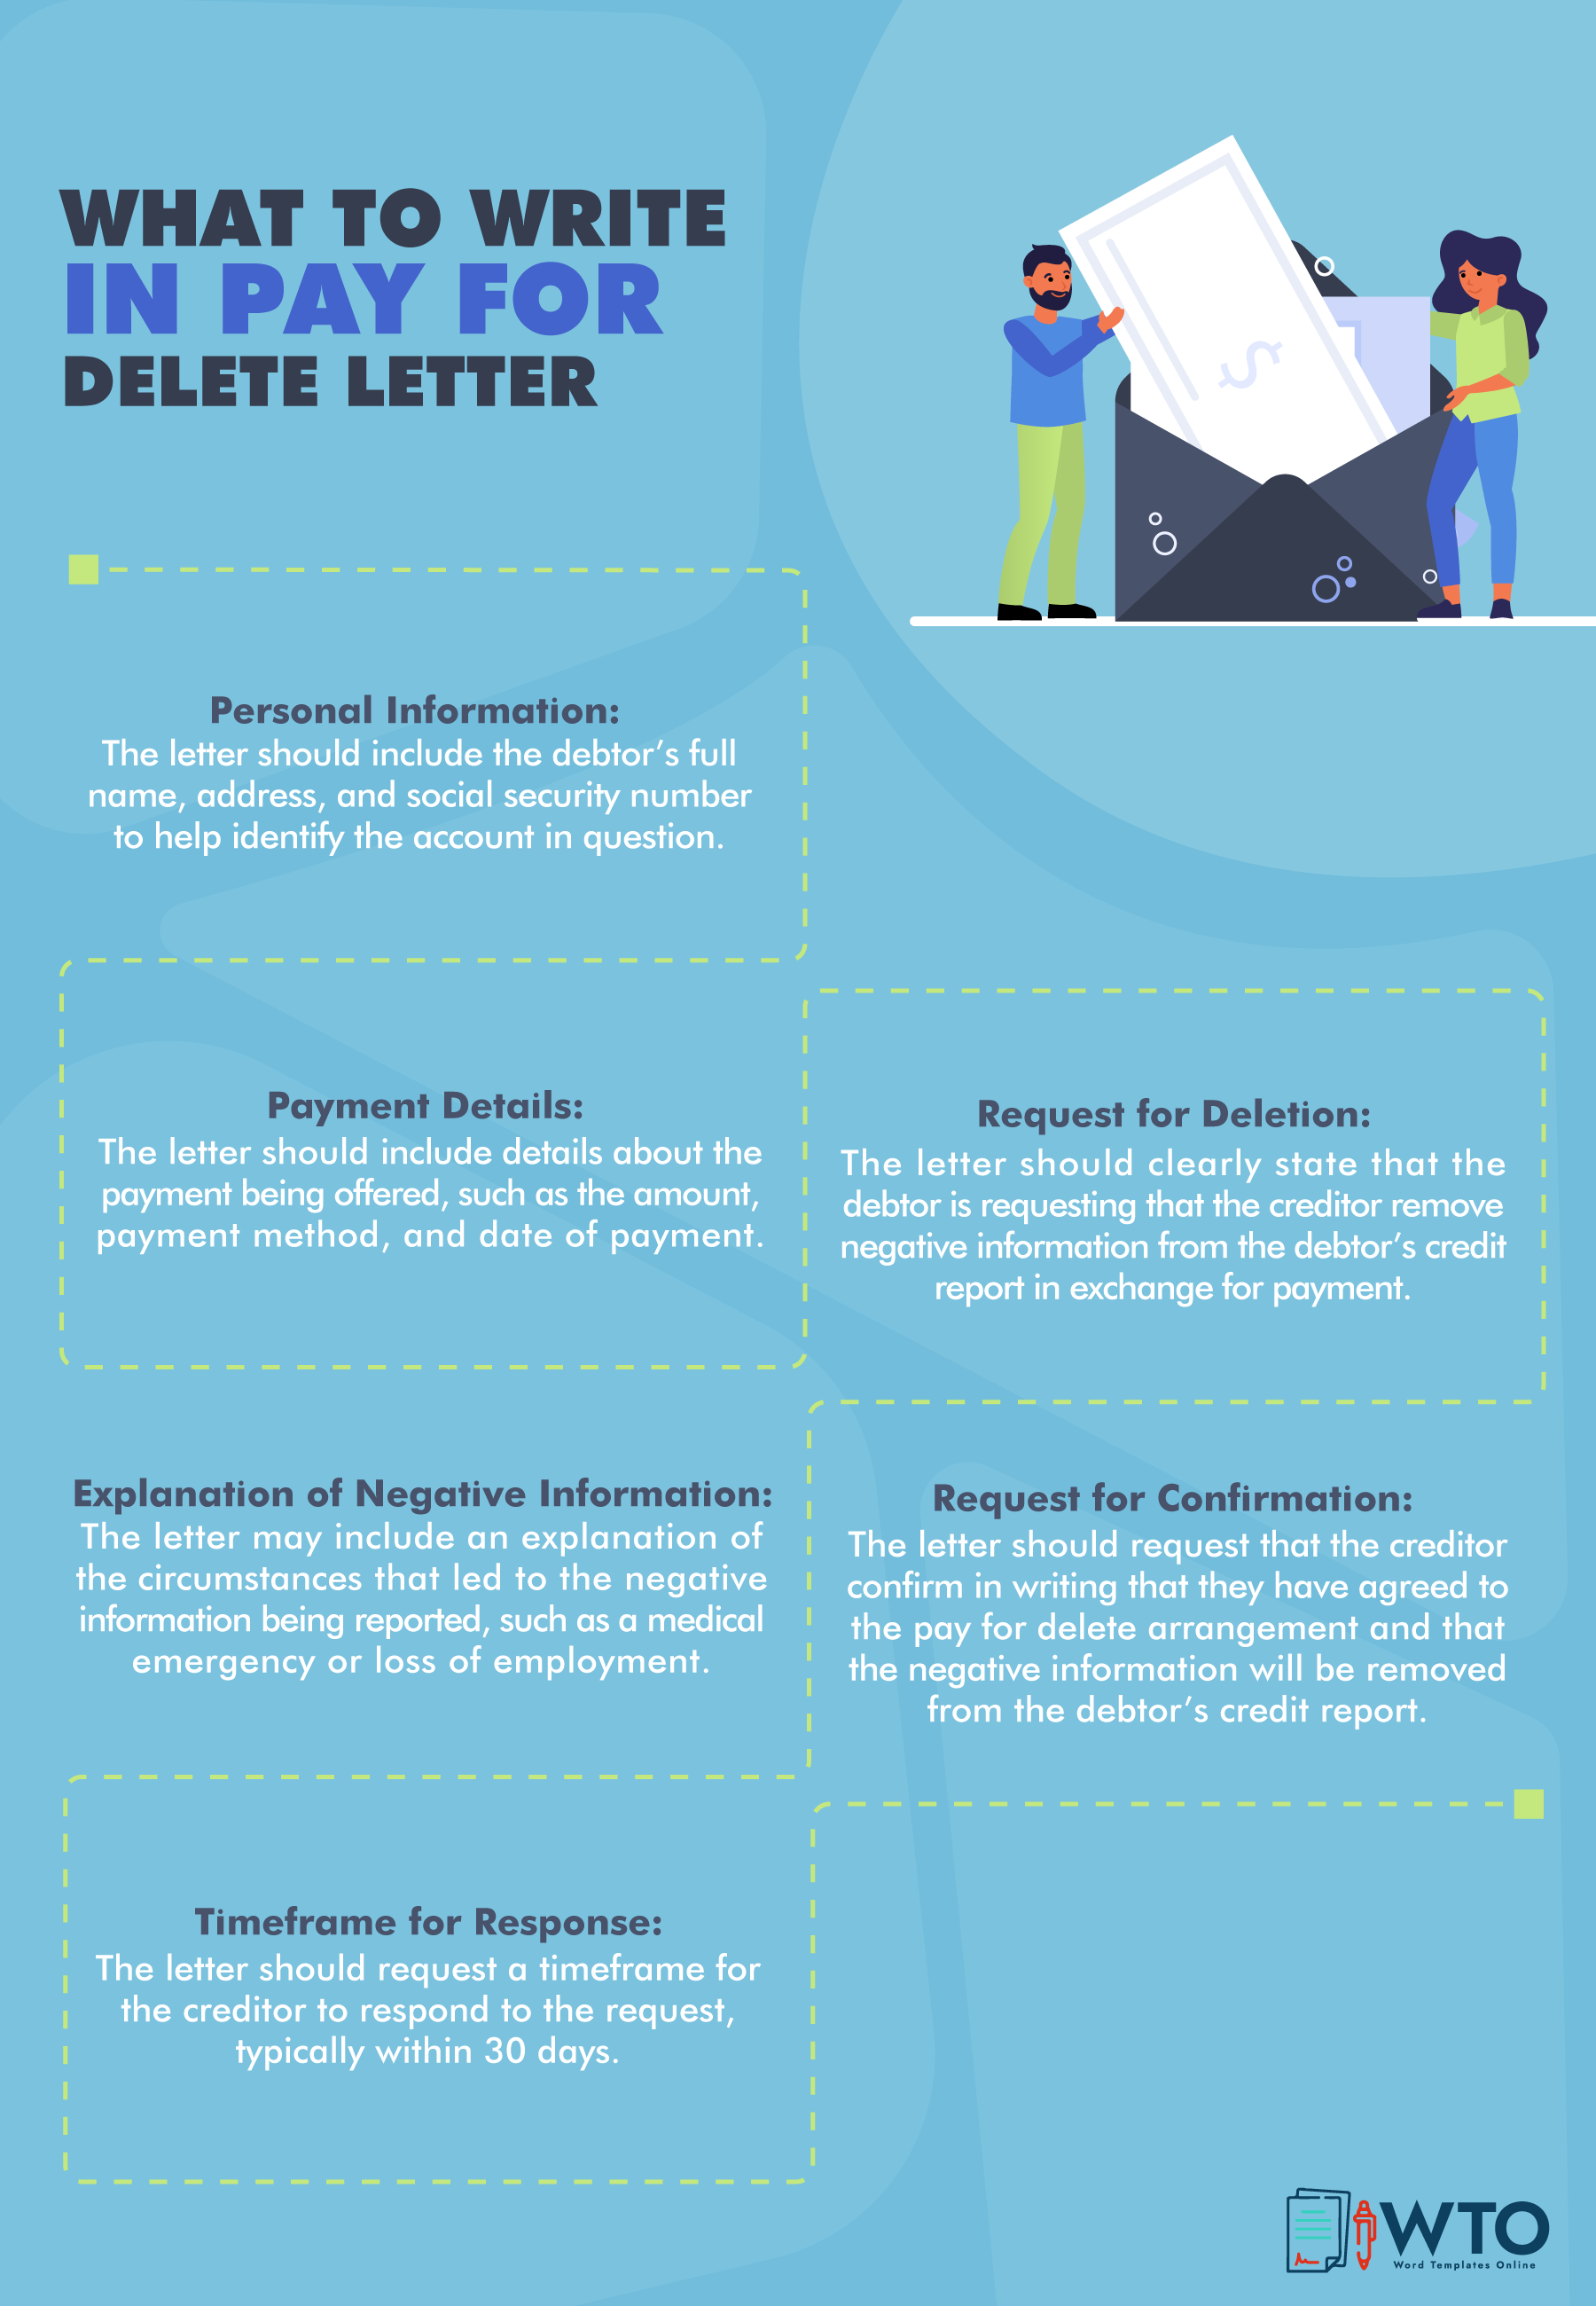 infographic of what to write in pay for delete letter